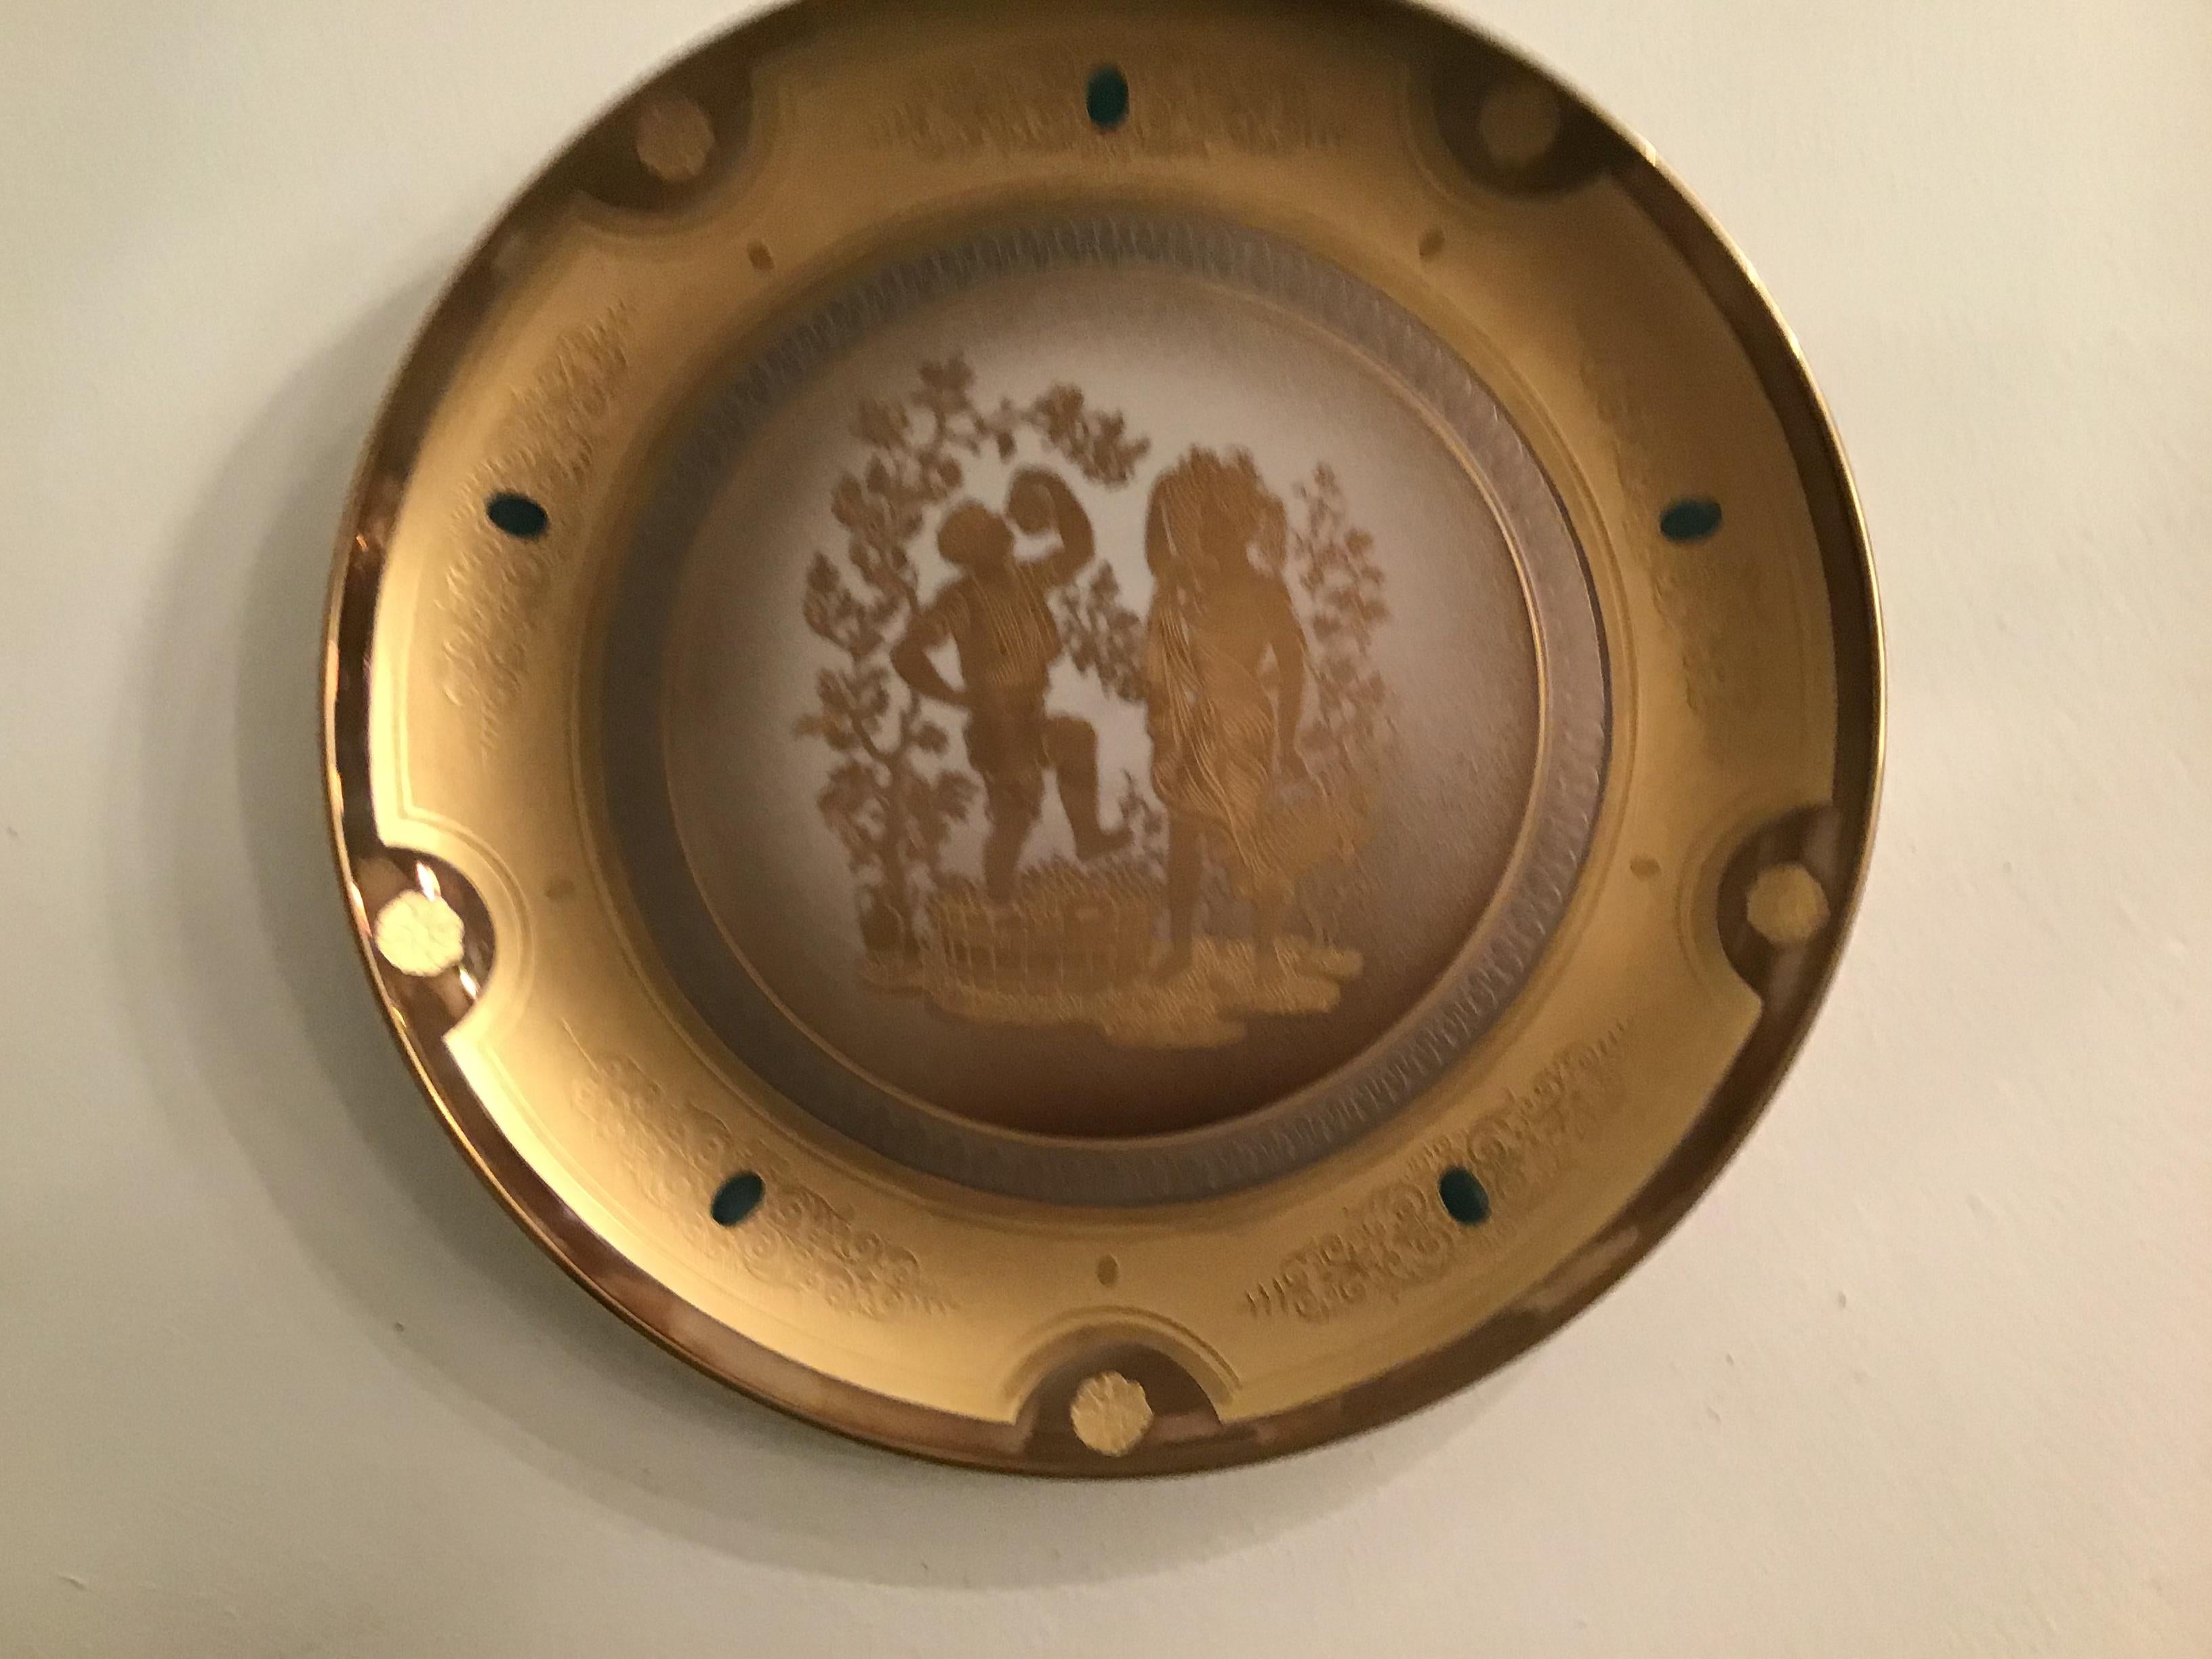 Morbelli Porcelain Wall Plate Gold “ Autunno”, 1960, Italy For Sale 13